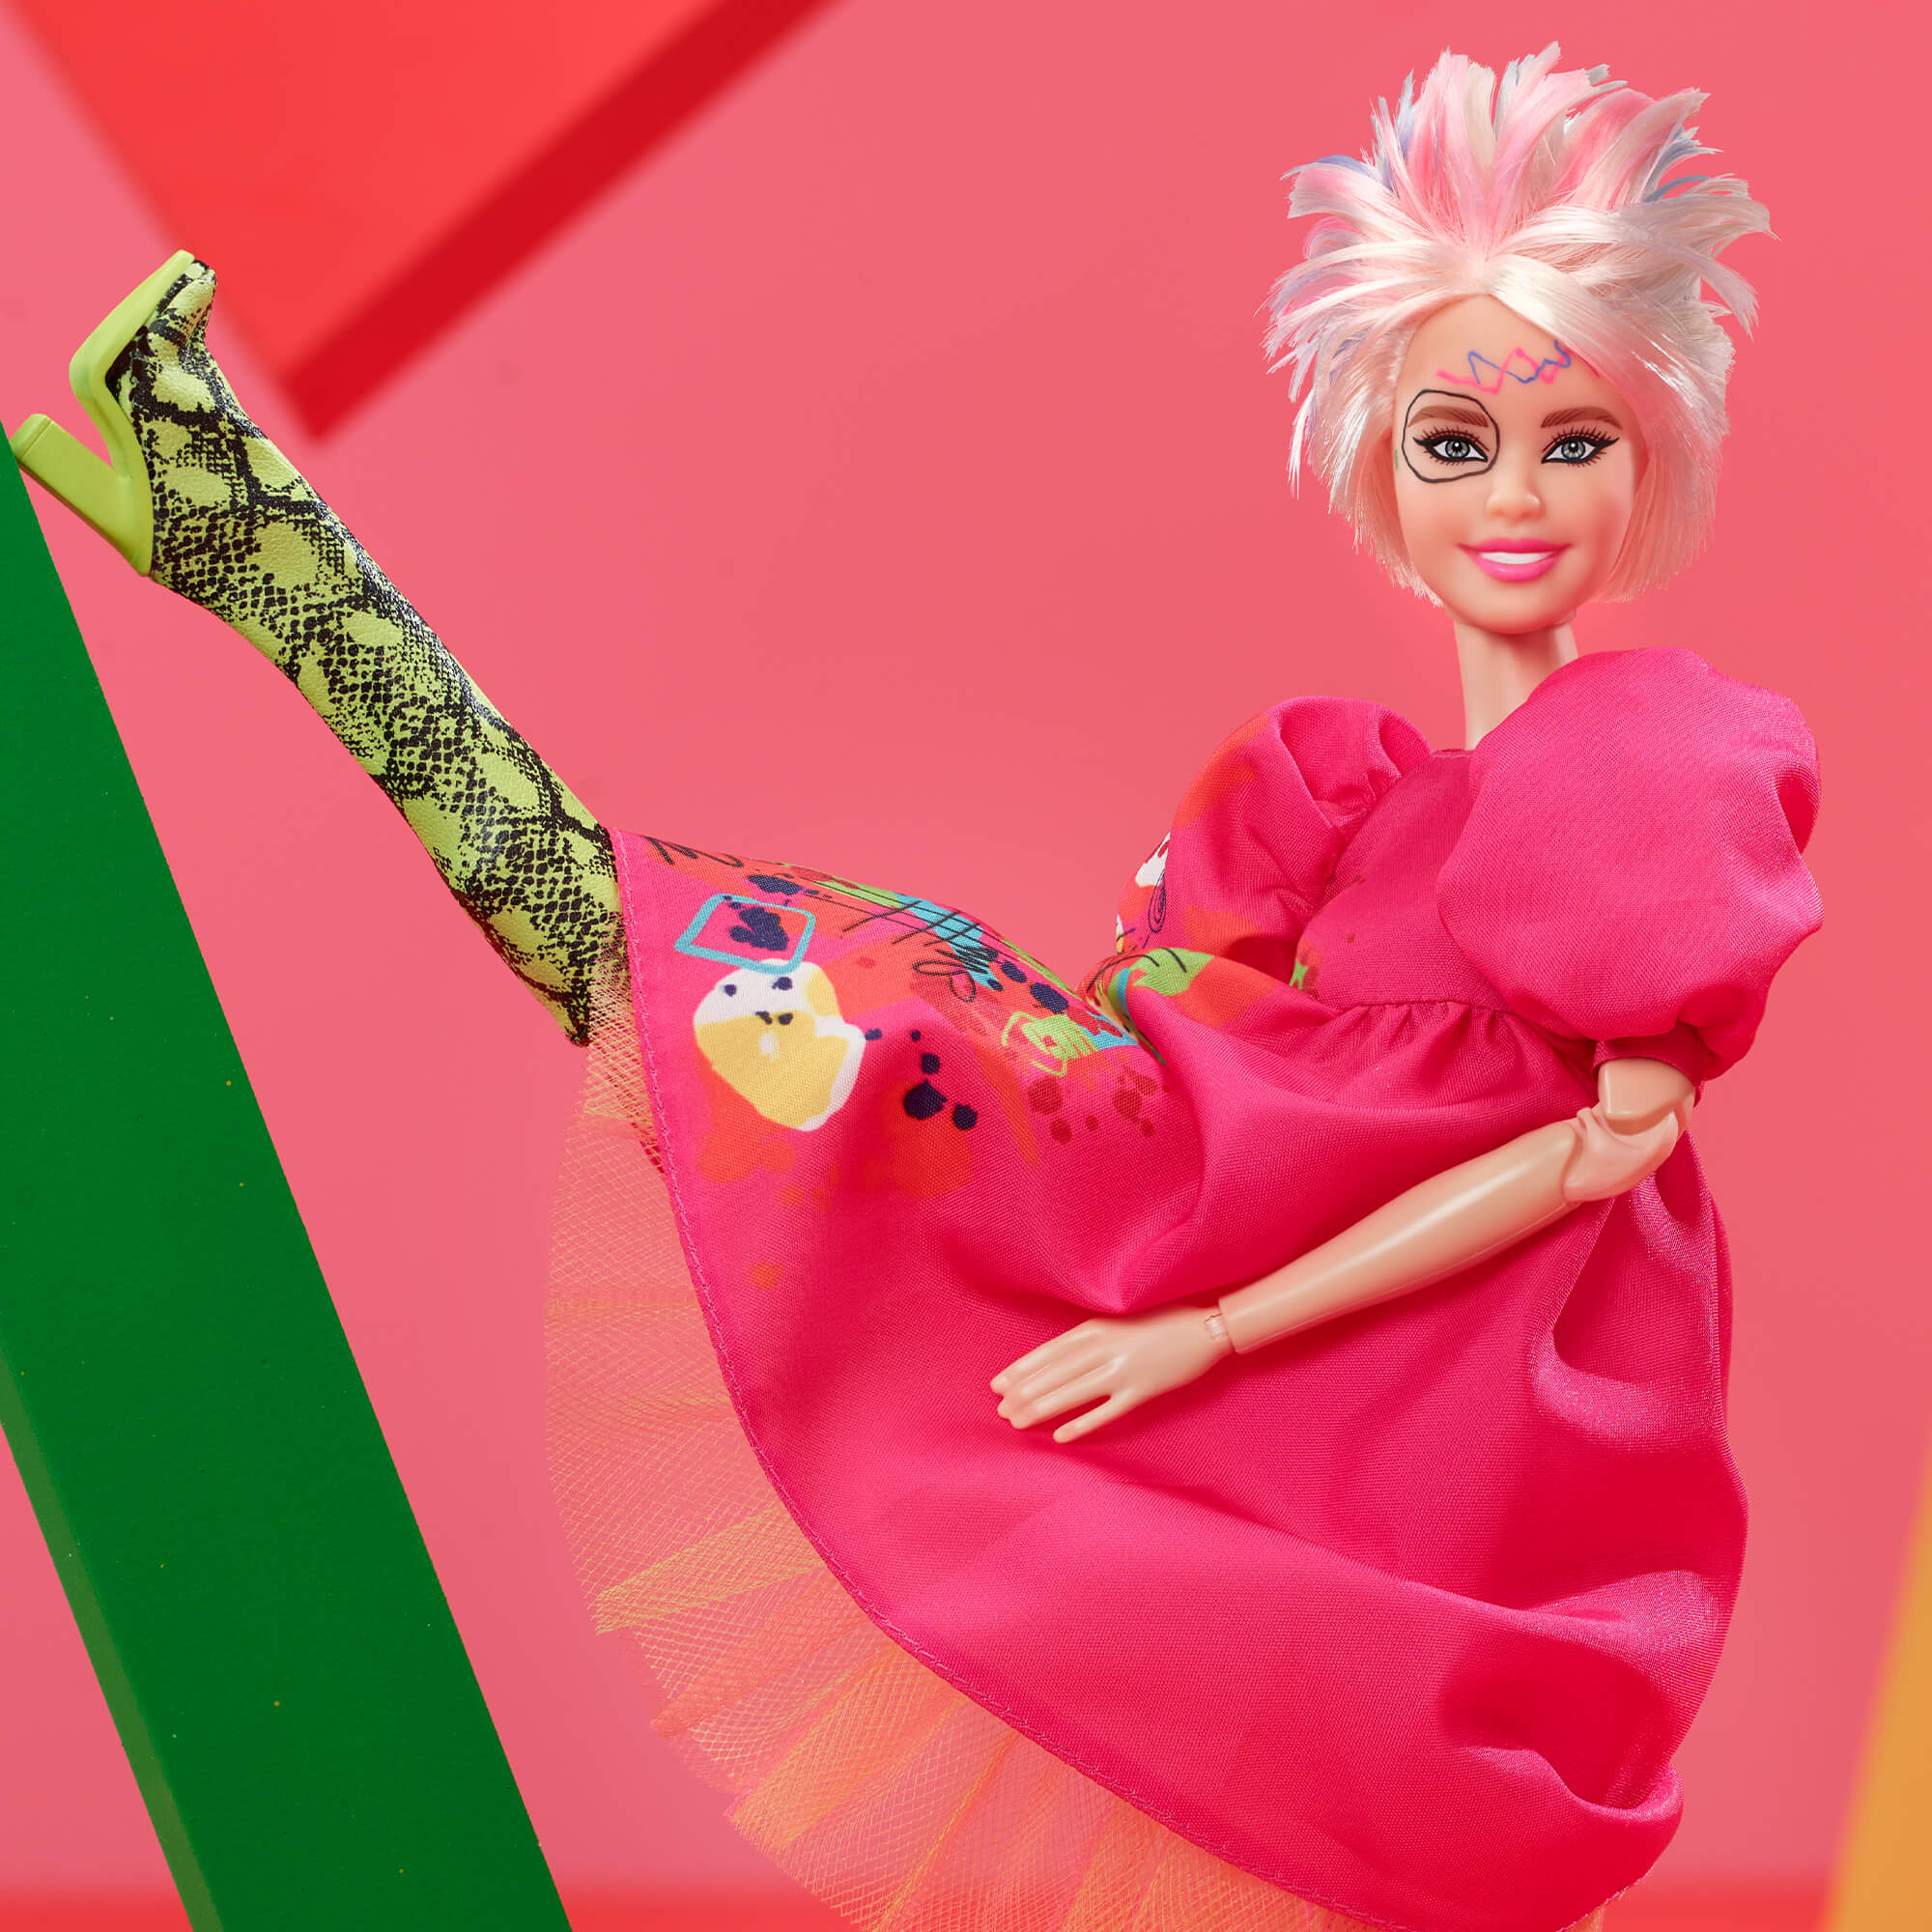 Mattel announces limited-edition 'Weird Barbie' doll for sale